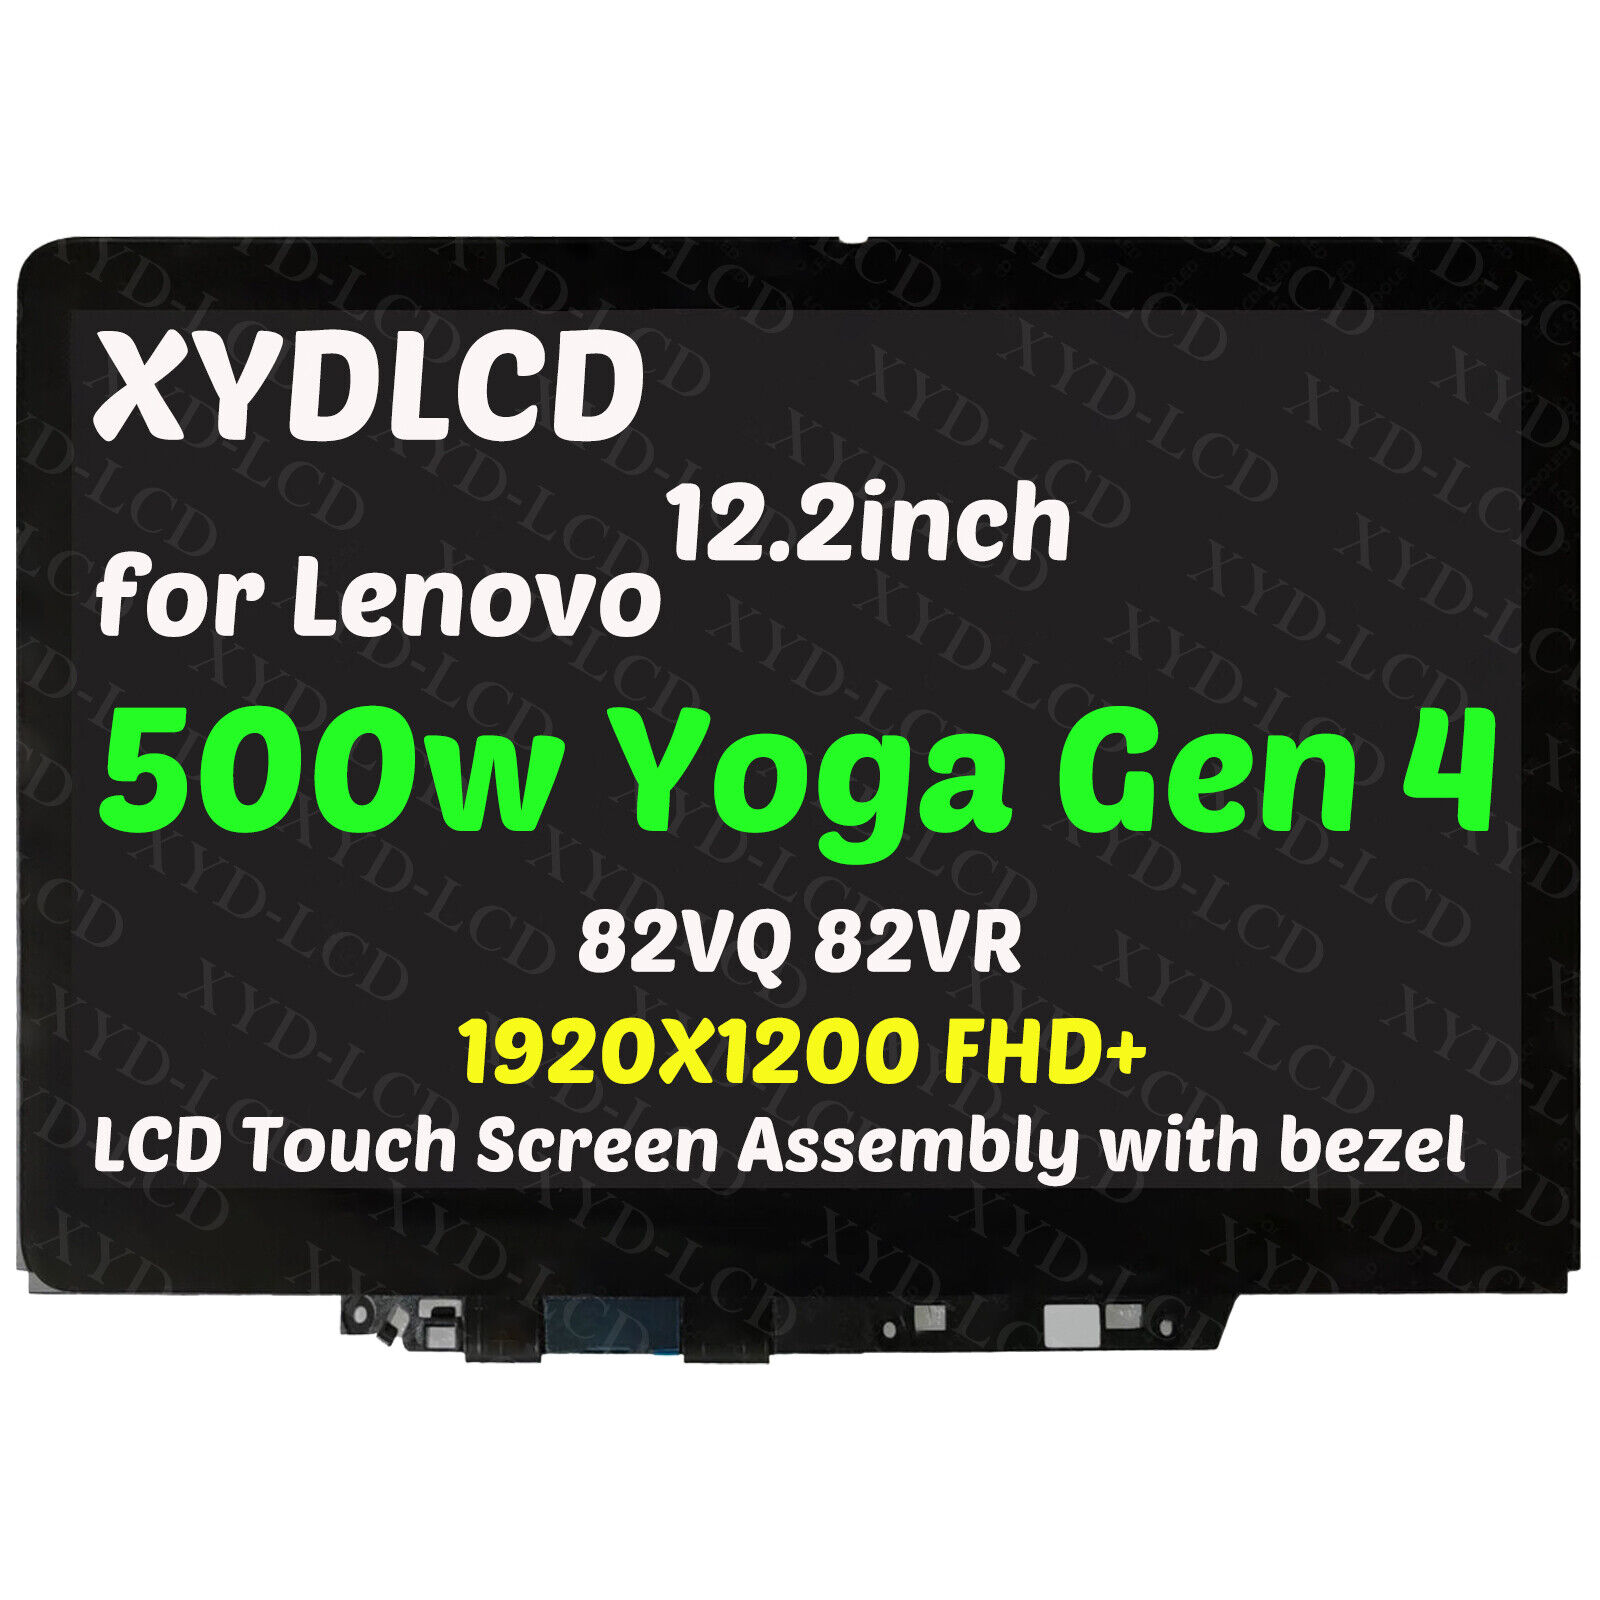 WUXGA LCD Touch Screen IPS Display Assembly for Lenovo 500w Yoga Gen 4 82VQ 82VR